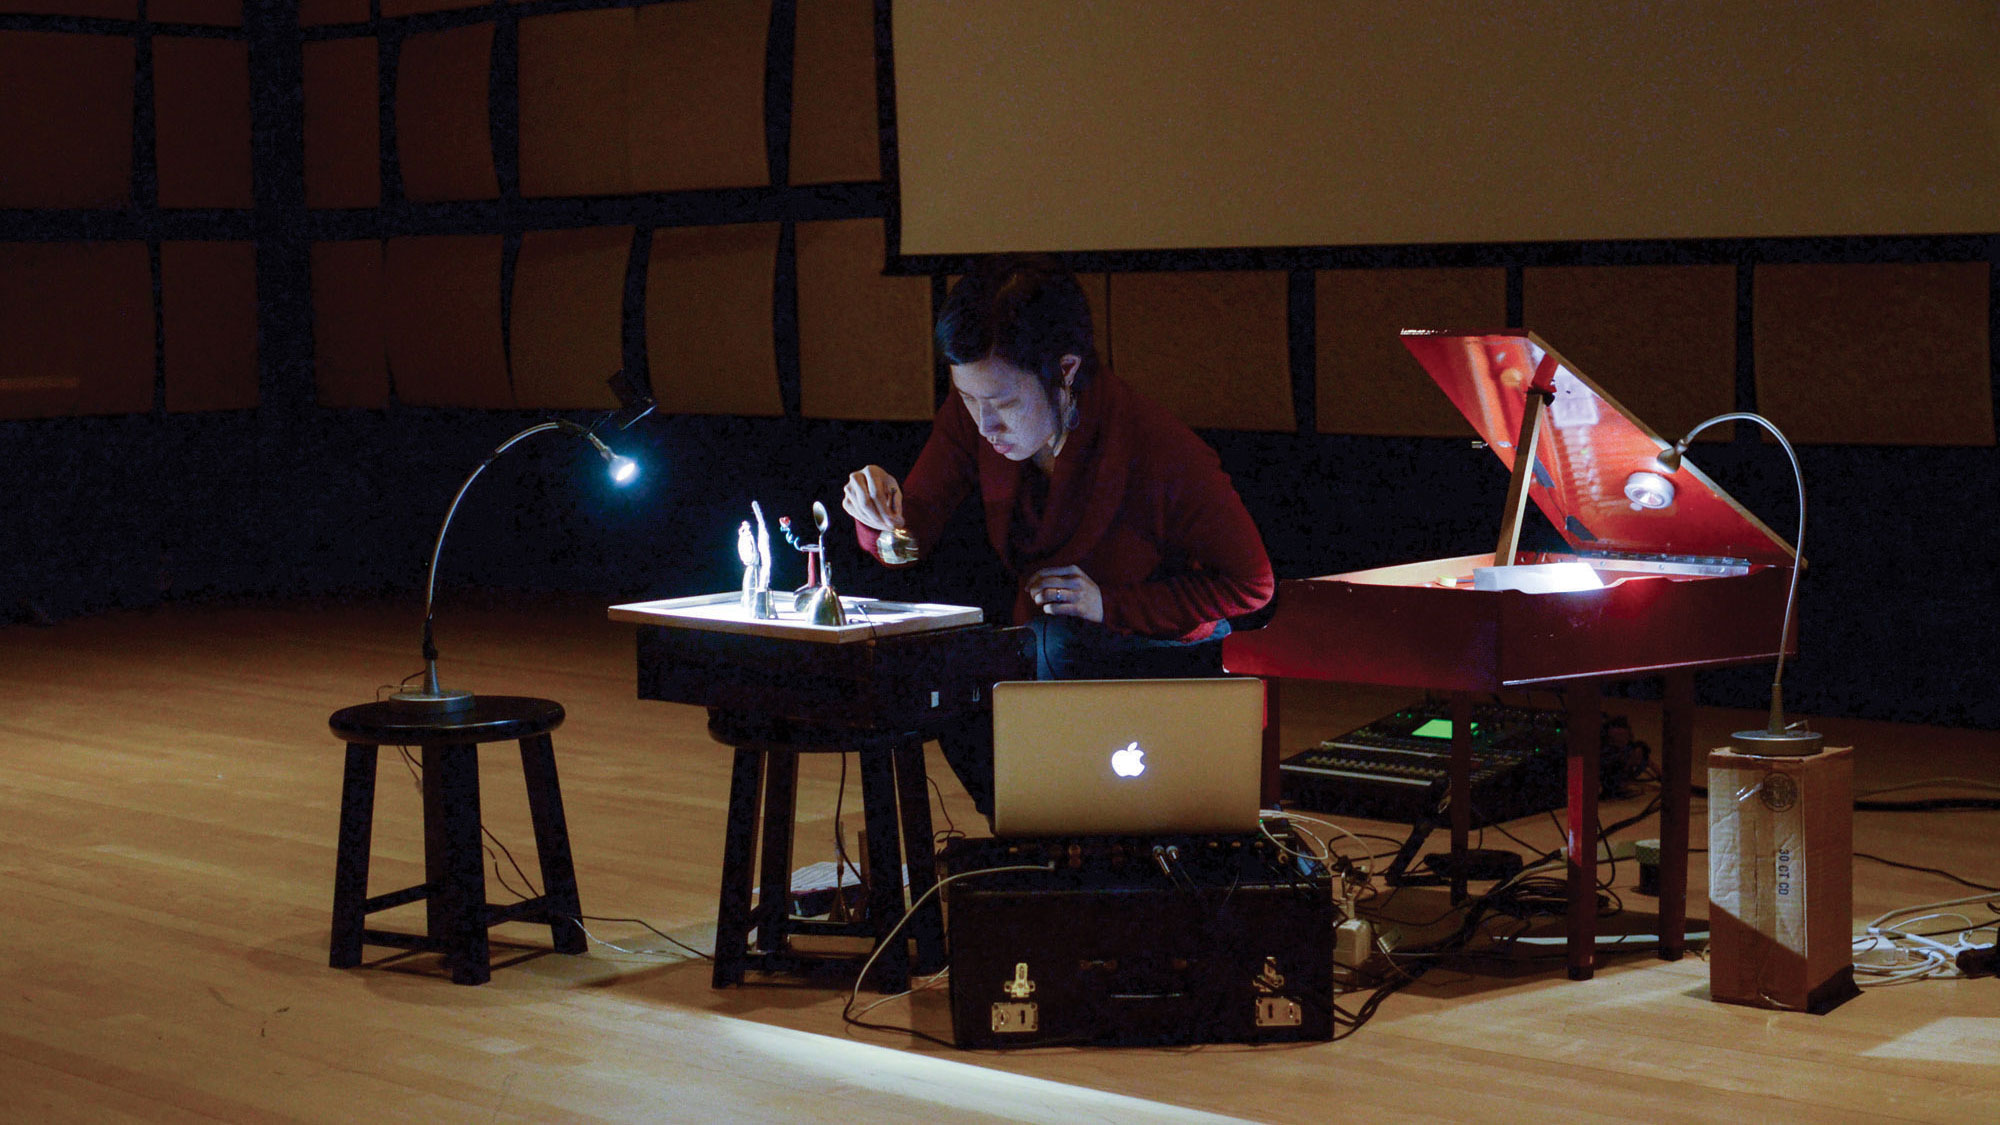 A woman hunched at a small desk setting up figurines under a light. She is surrounded by a small red piano and sound recording equipment. 